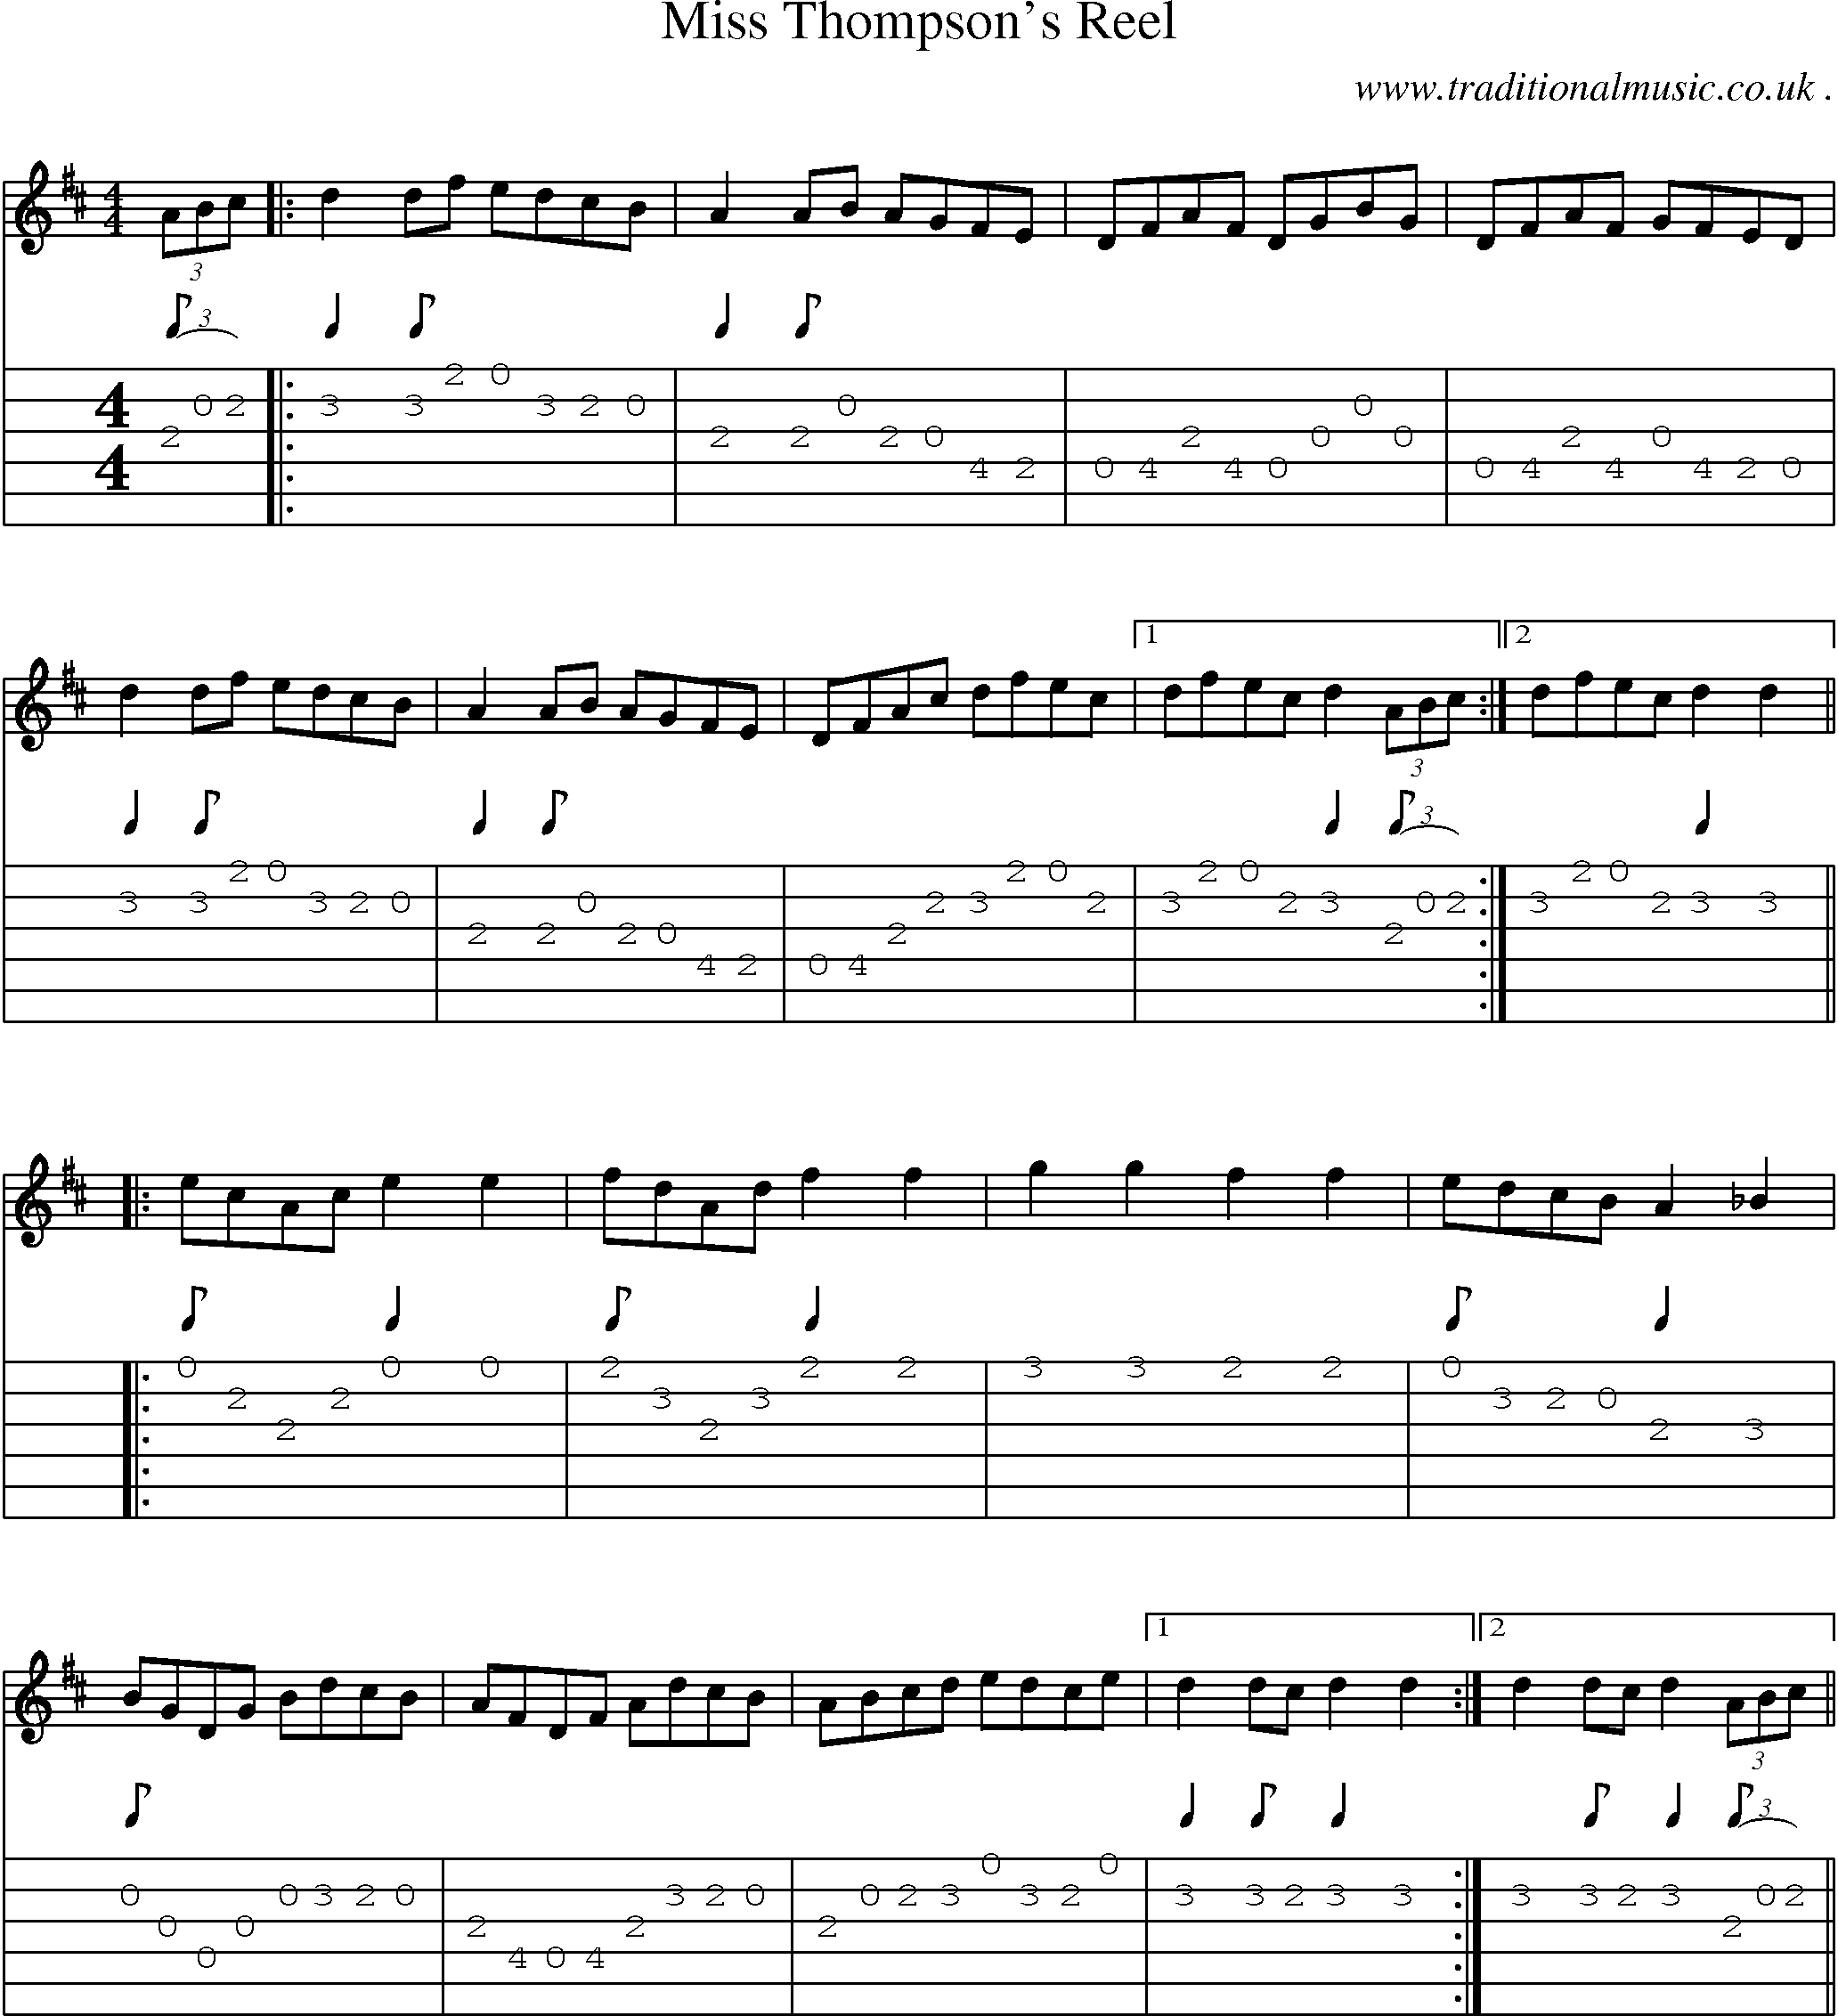 Sheet-Music and Guitar Tabs for Miss Thompsons Reel